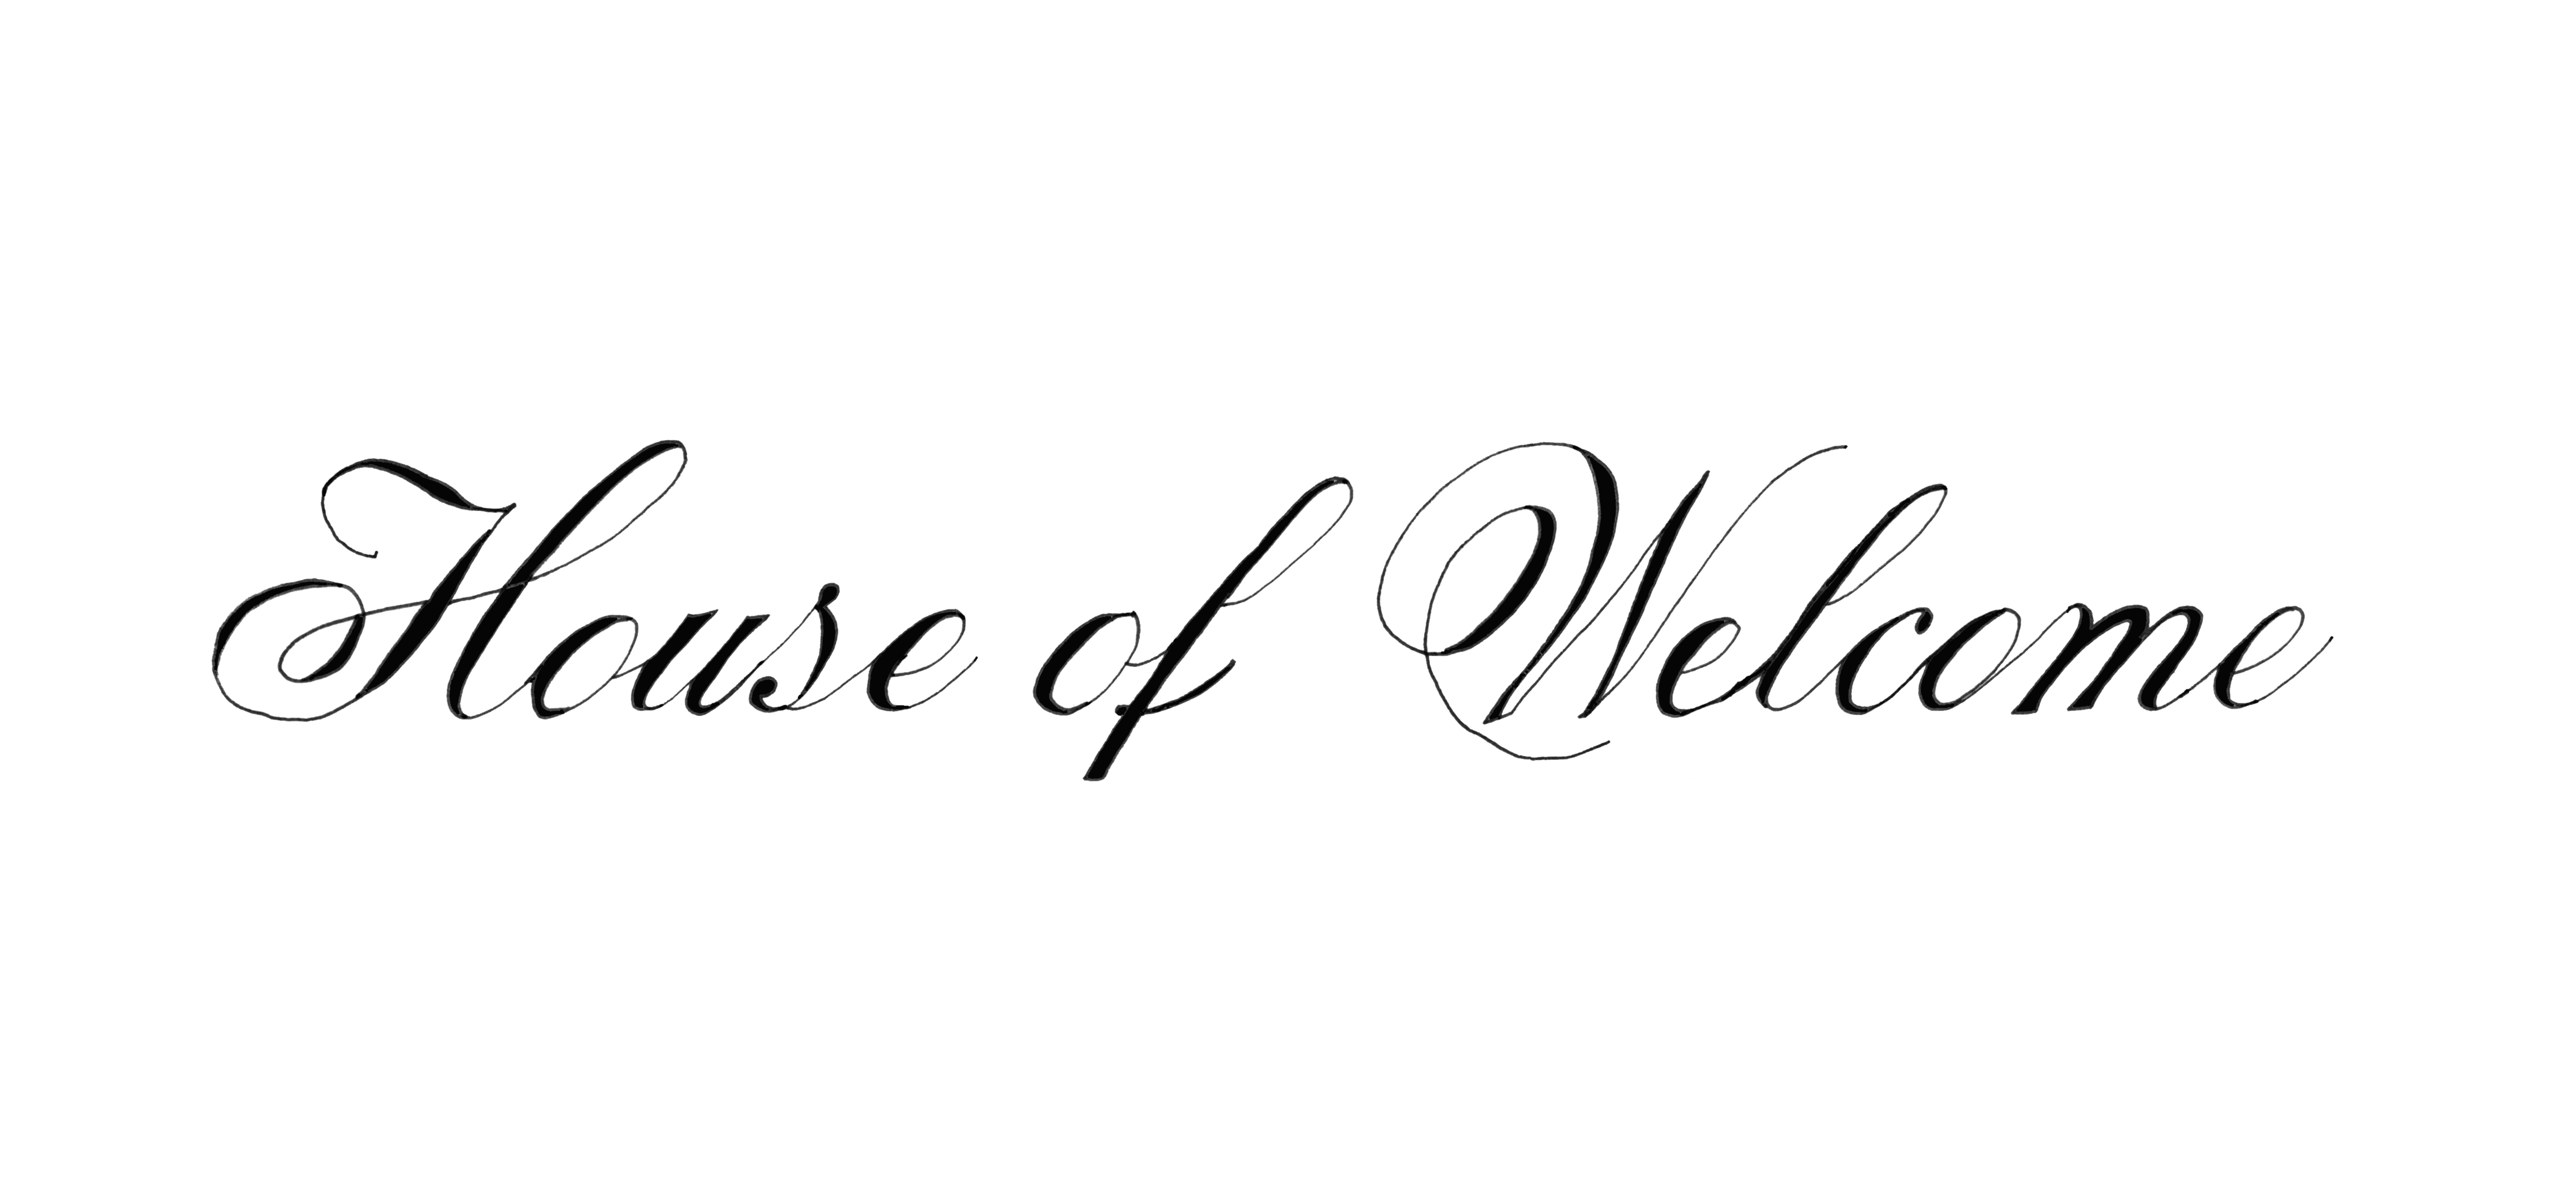 "house of welcome" is written with black ink on a white & black surface